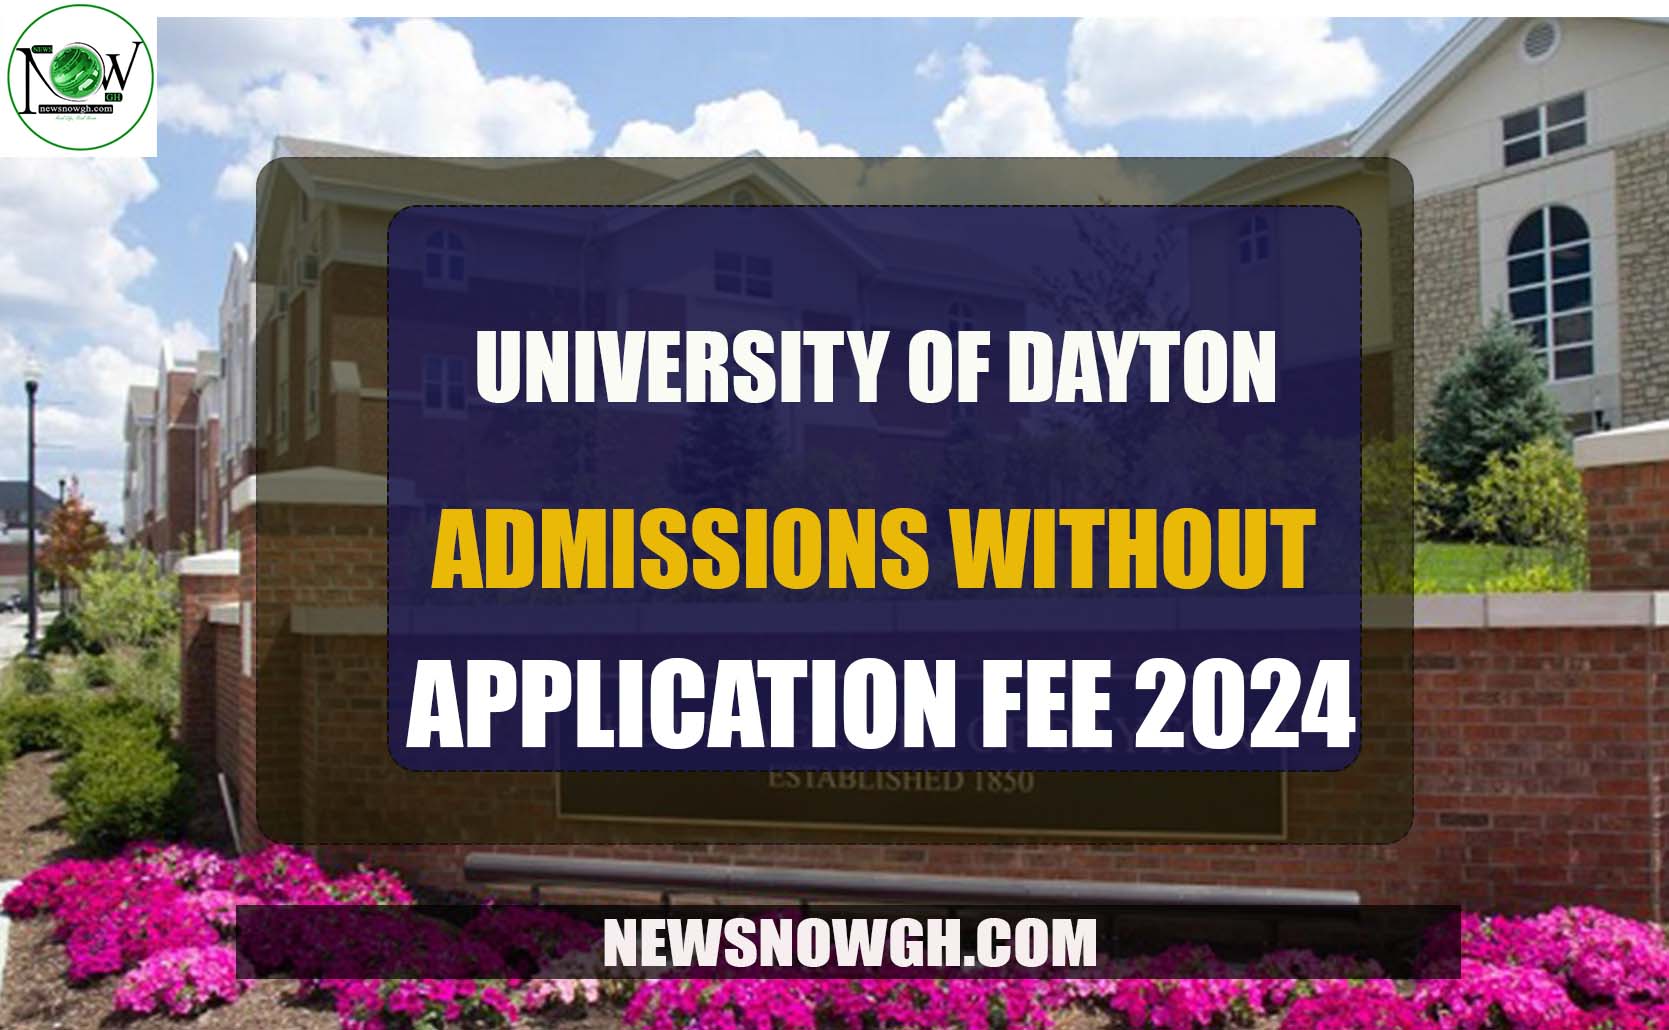 University of Dayton admissions without application fee 2024